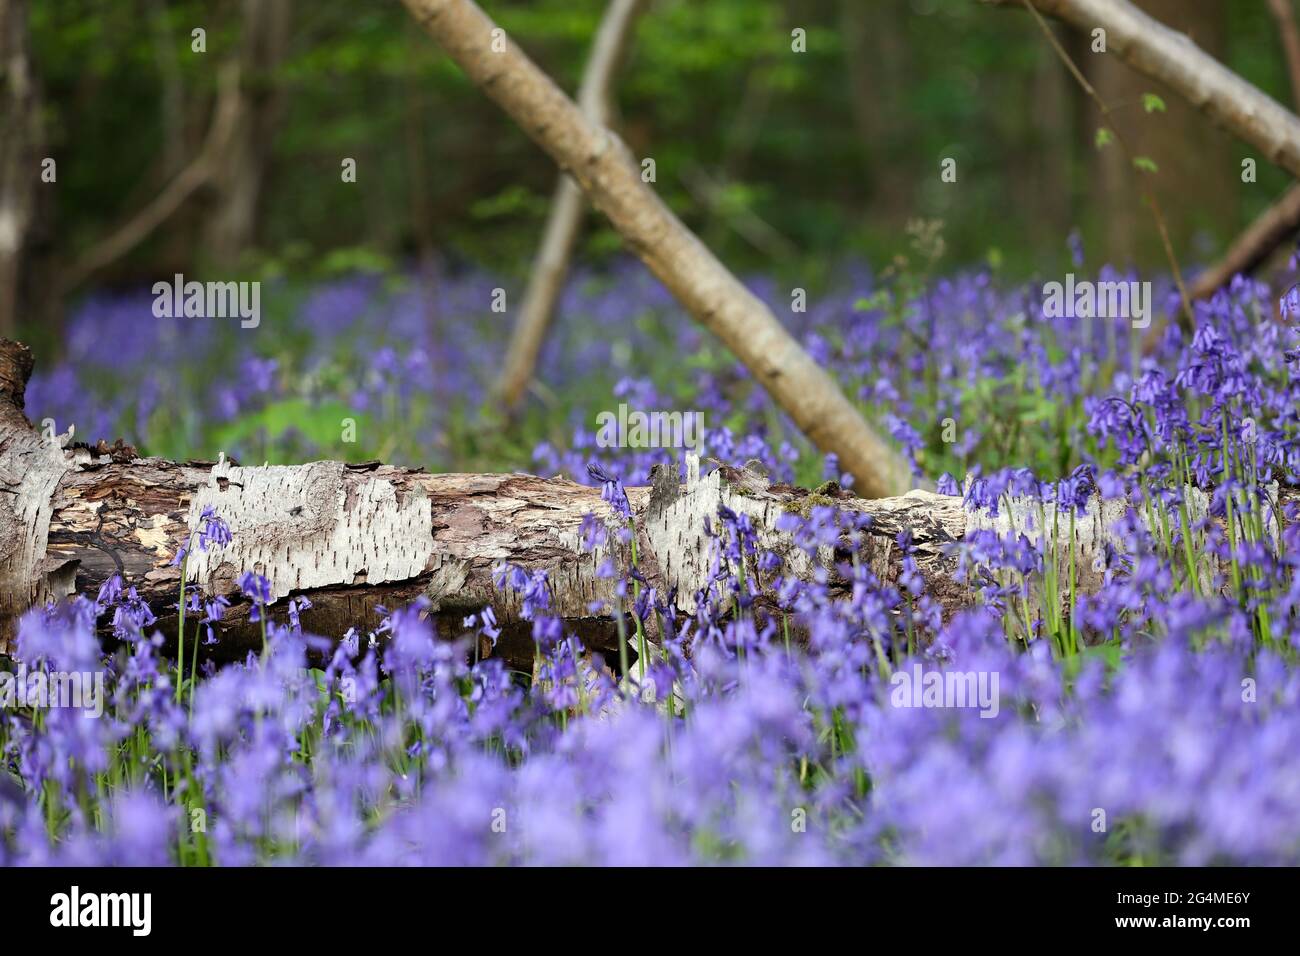 English Woodland. A dead decaying tree lies amongst Bluebell  flowers in an ancient Surrey Woodland, England. Stock Photo